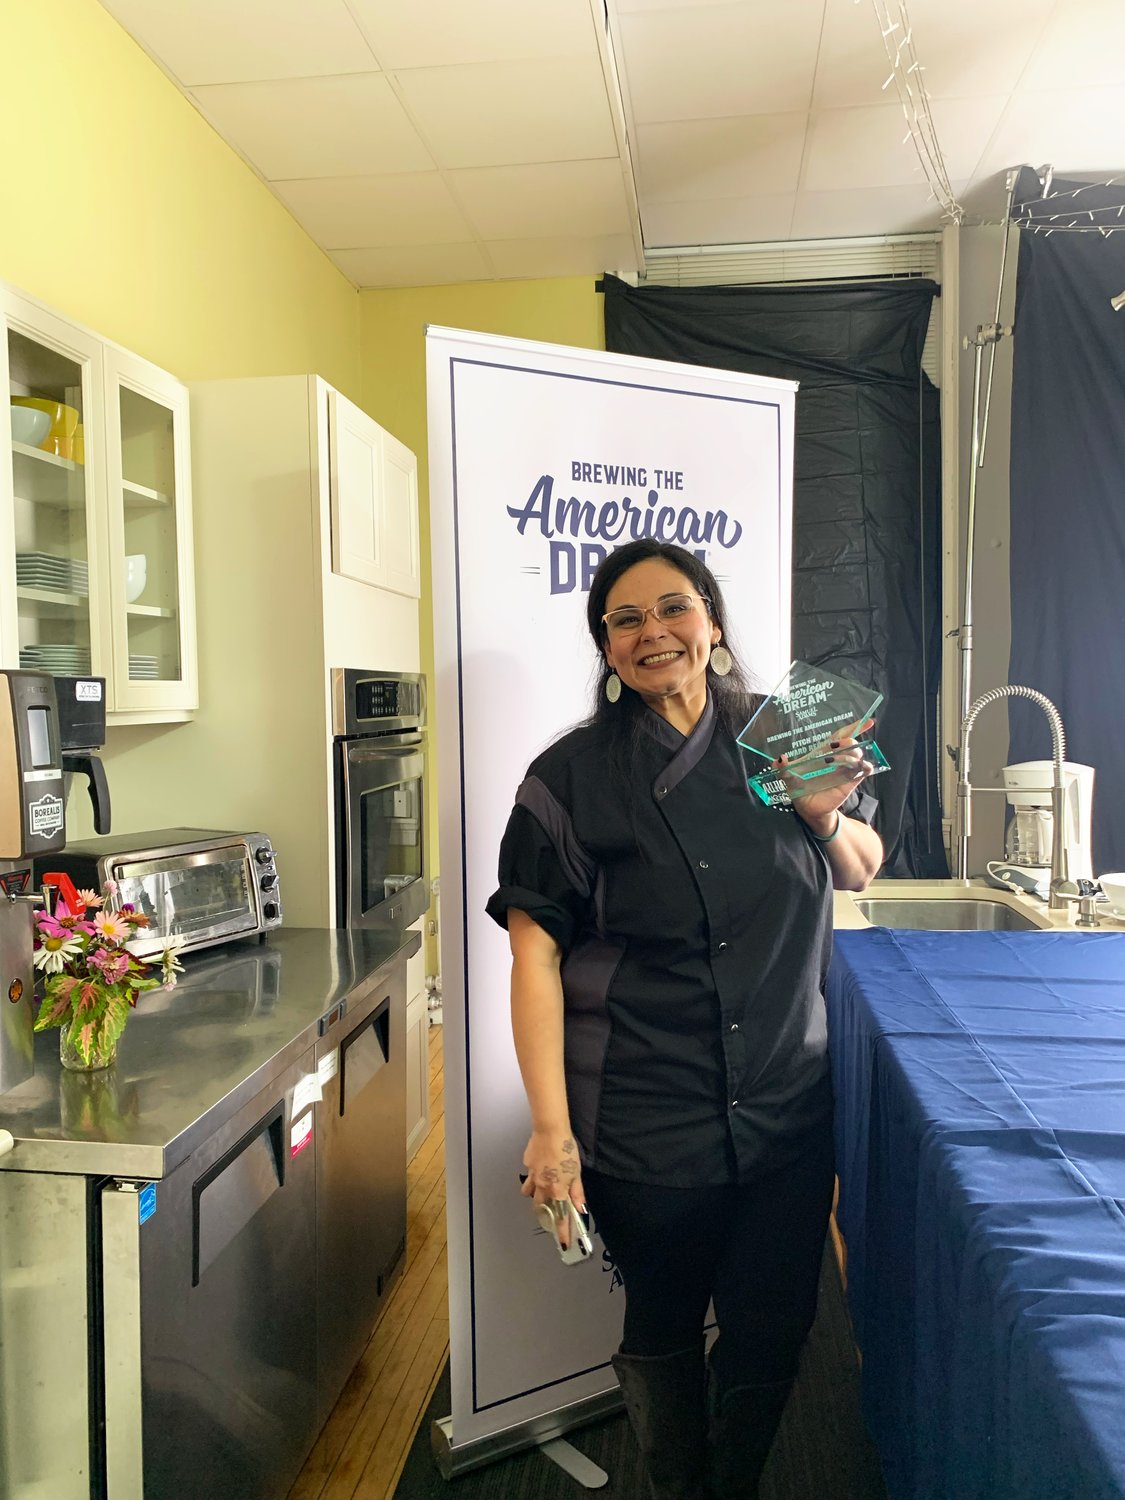 Aura Fajardo, owner of Aura's Chocolate Bar, won the $8,000 grand prize at the first Pitch Room Competition, sponsored by Sam Adams Brewing Company.